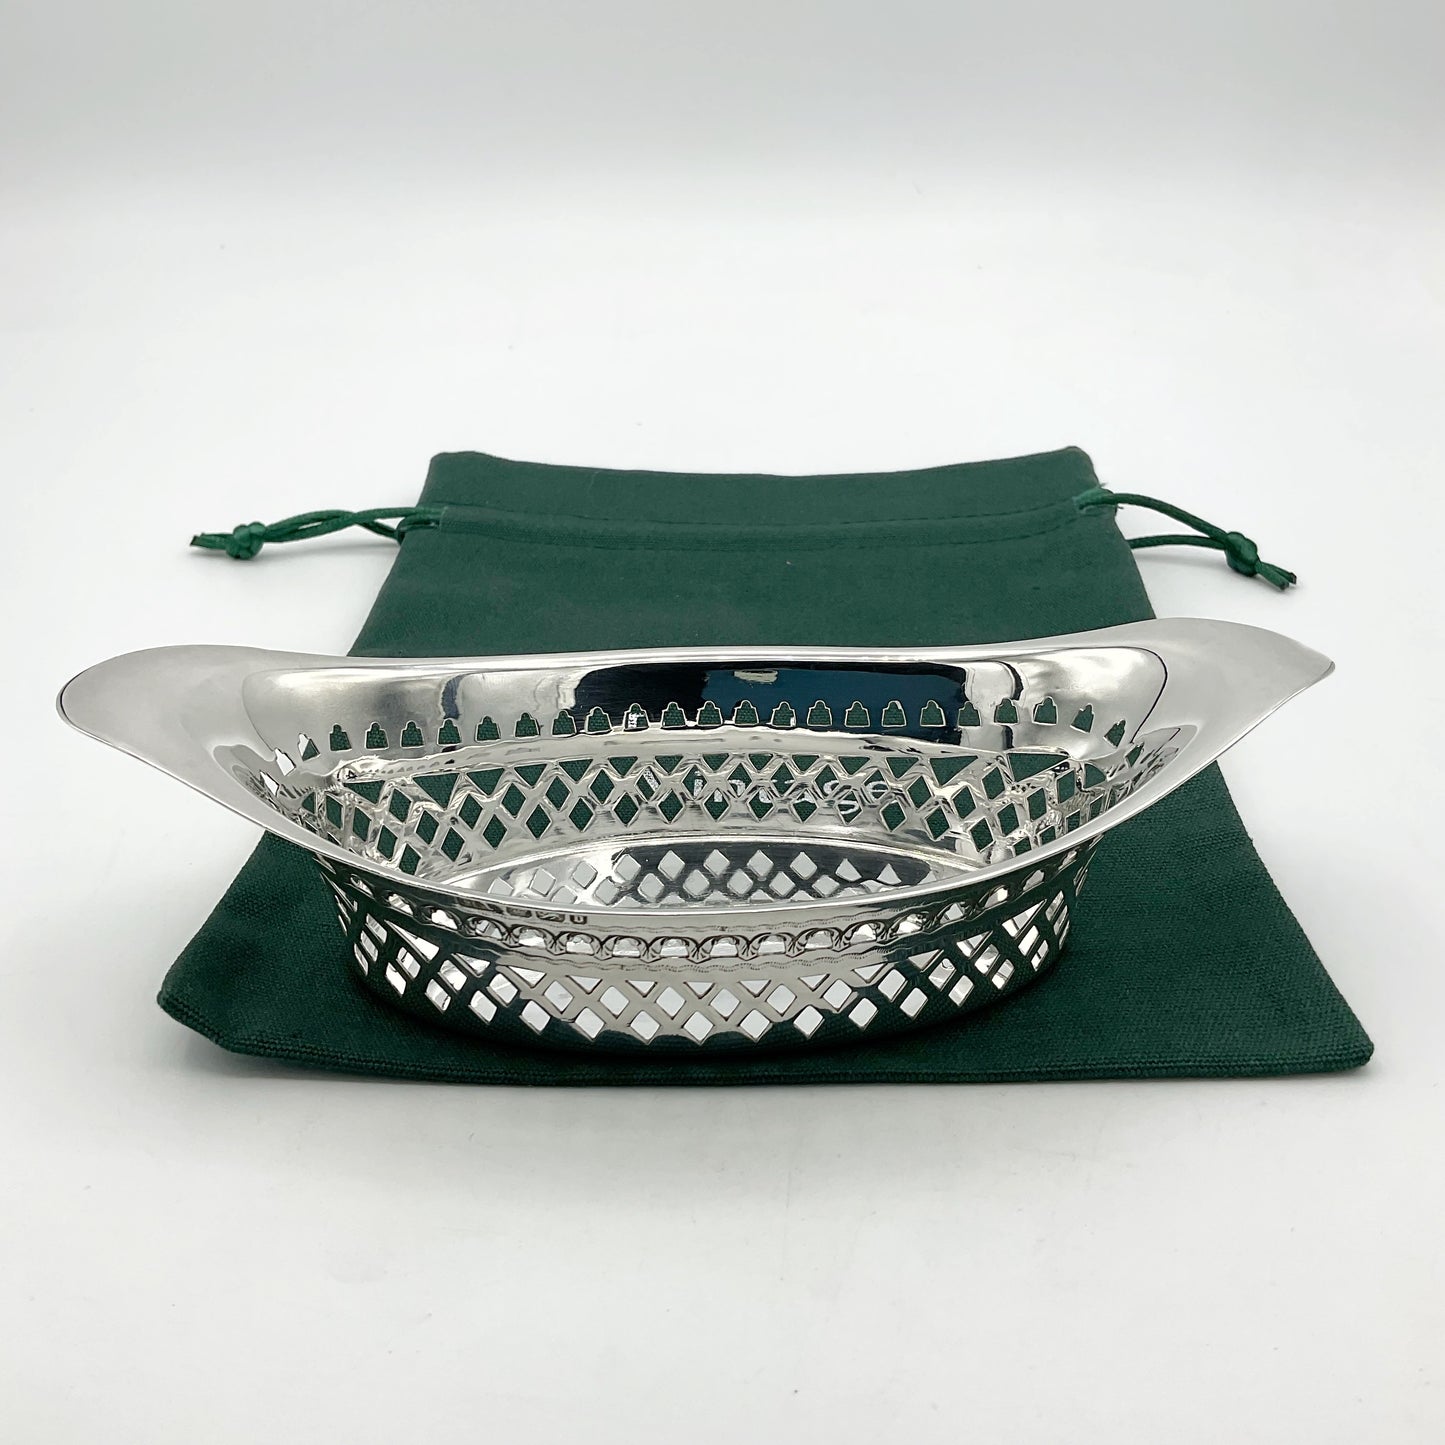 Silver boat shaped pierced bowl on green cotton bag